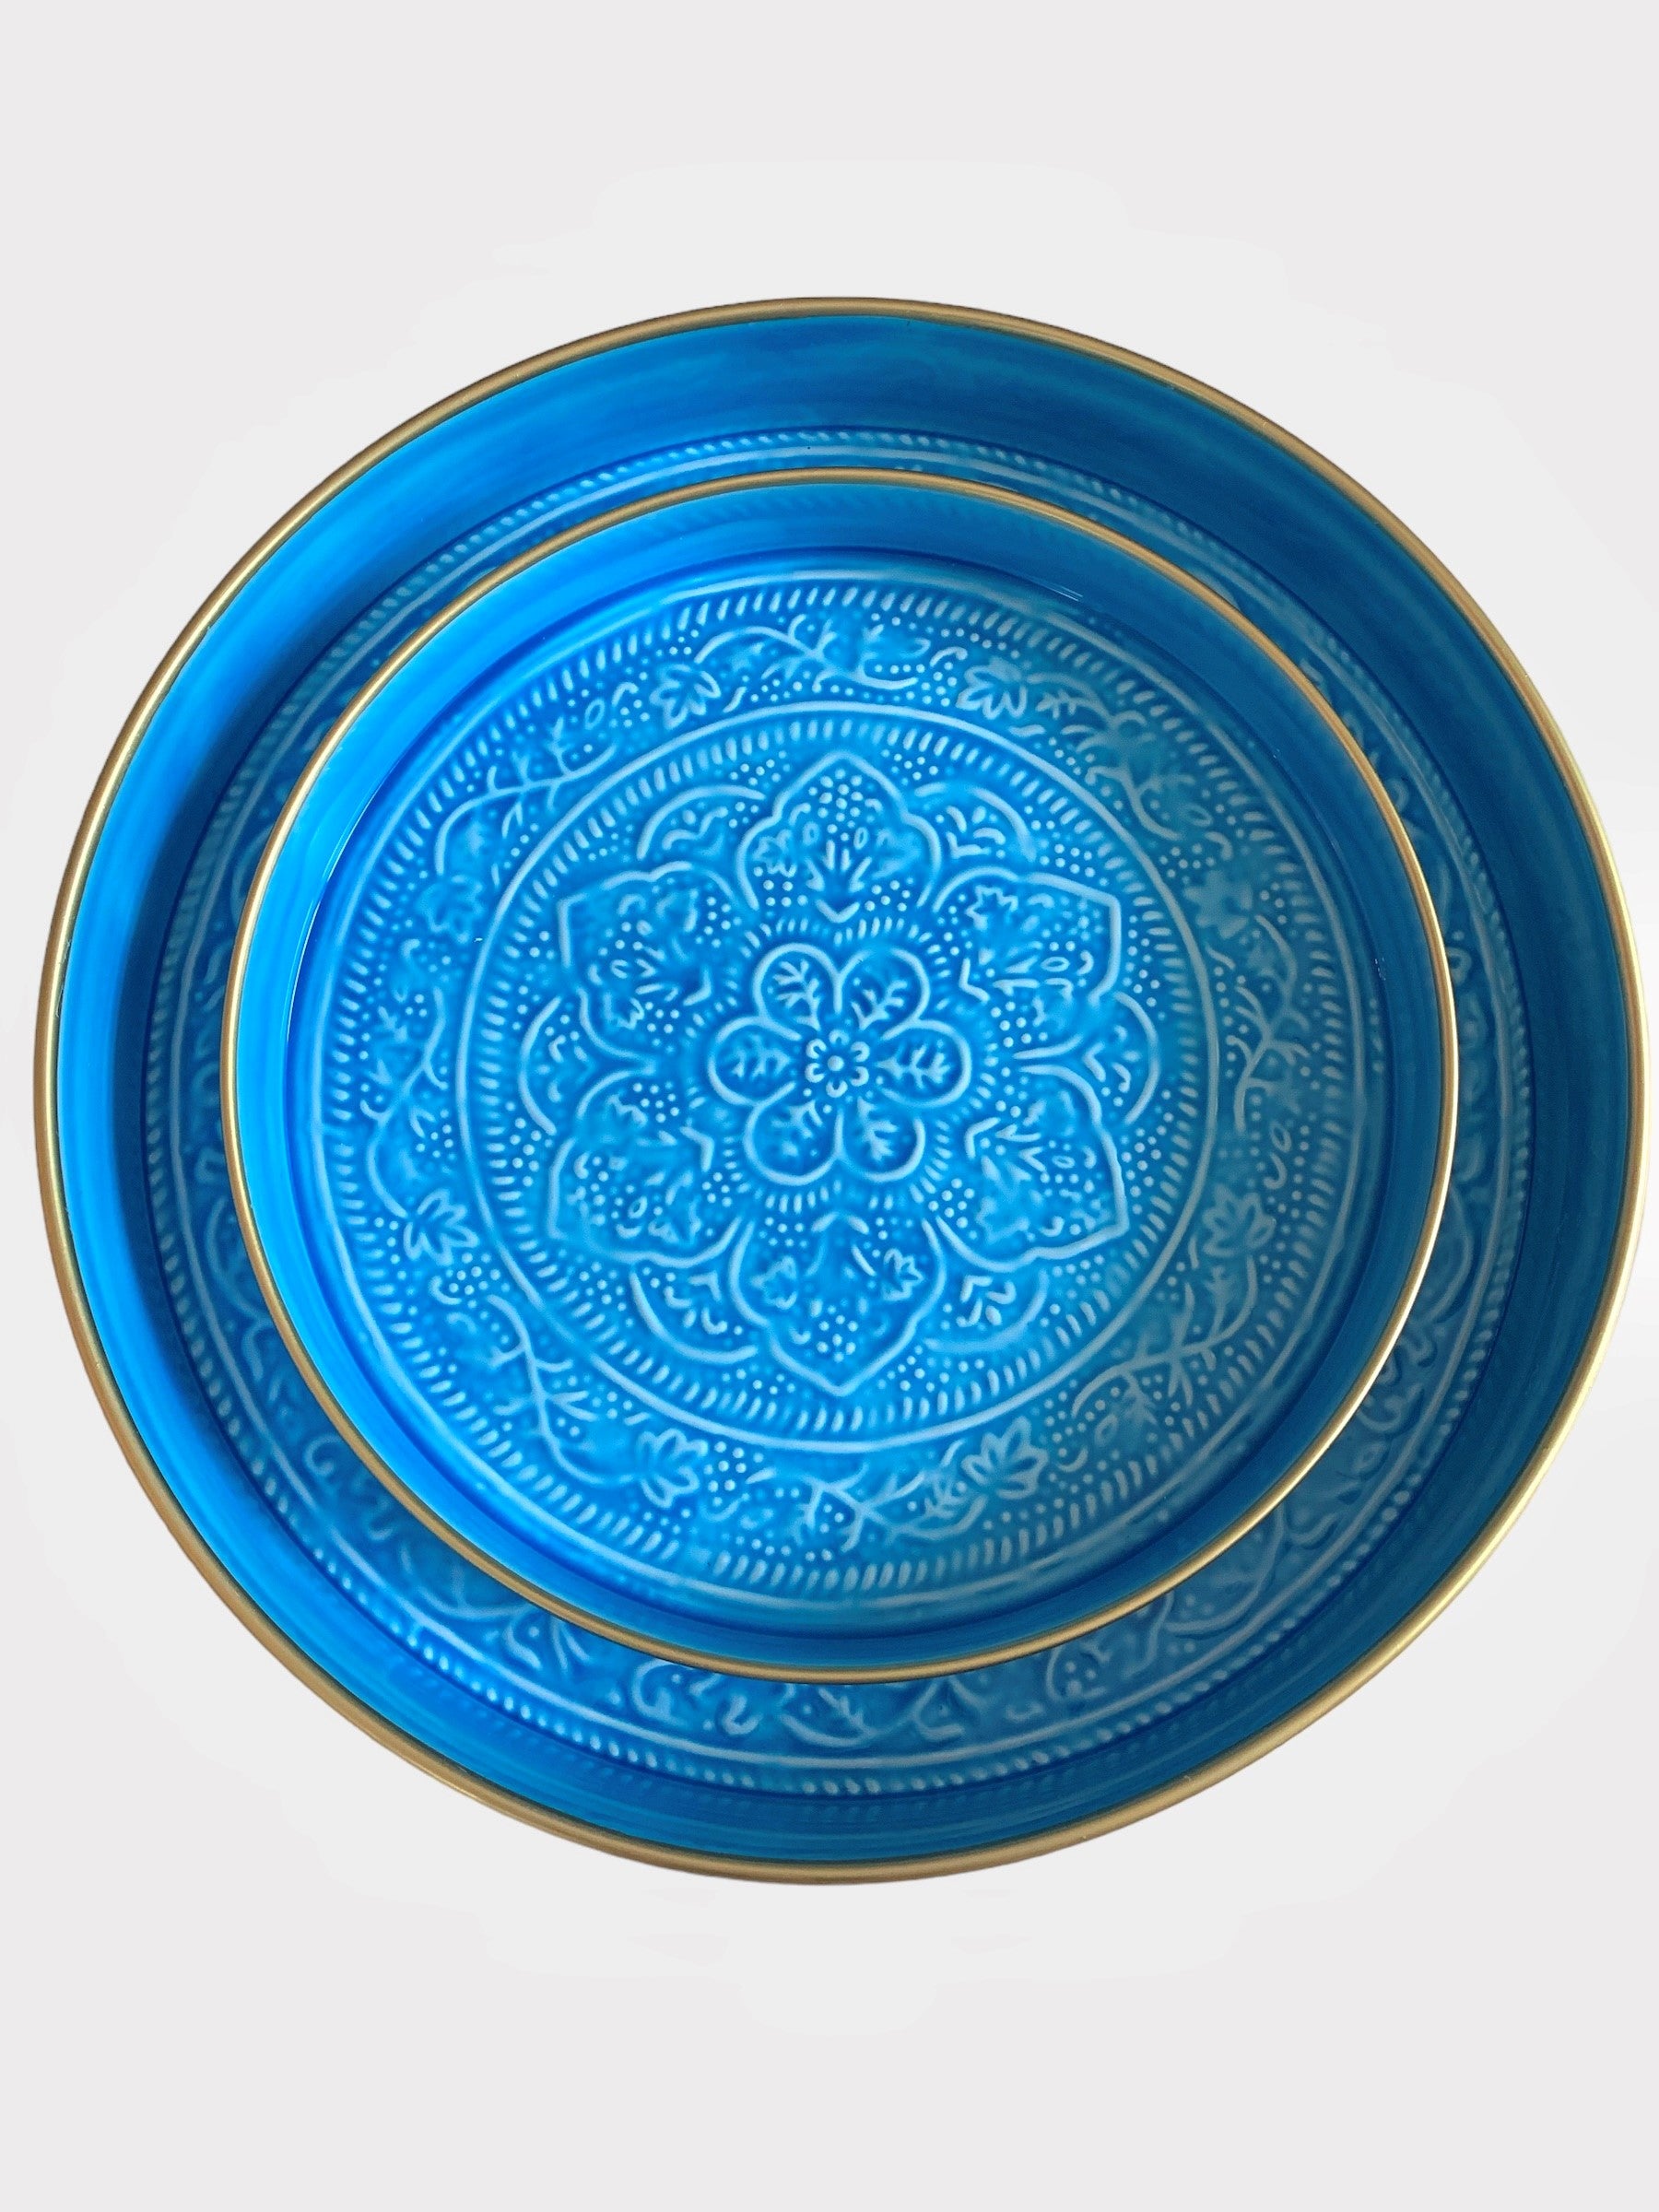 A nest of bright blue enamel trays with floral embossed detail.